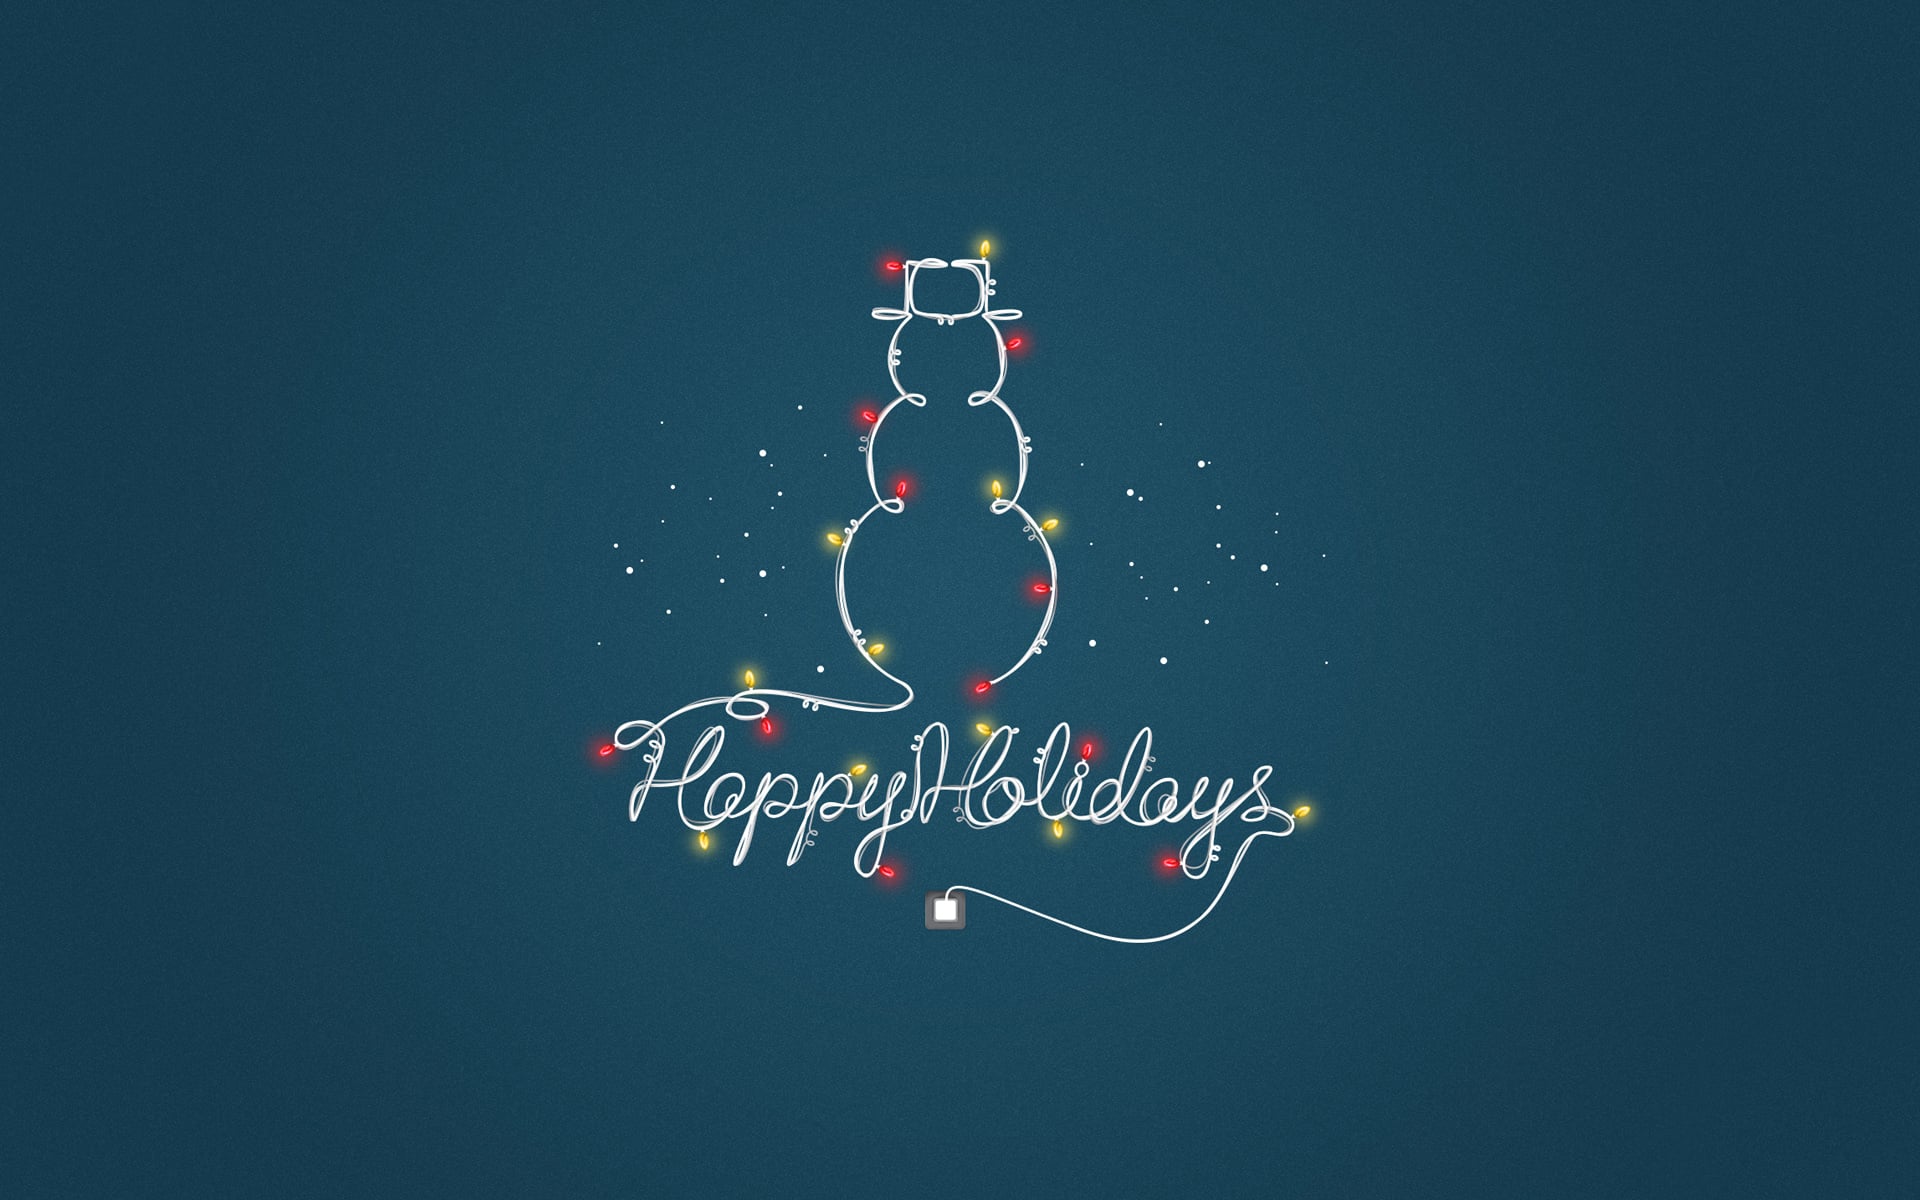 Happy holidays free holiday desktop wallpaper youll never want to take down tech photo